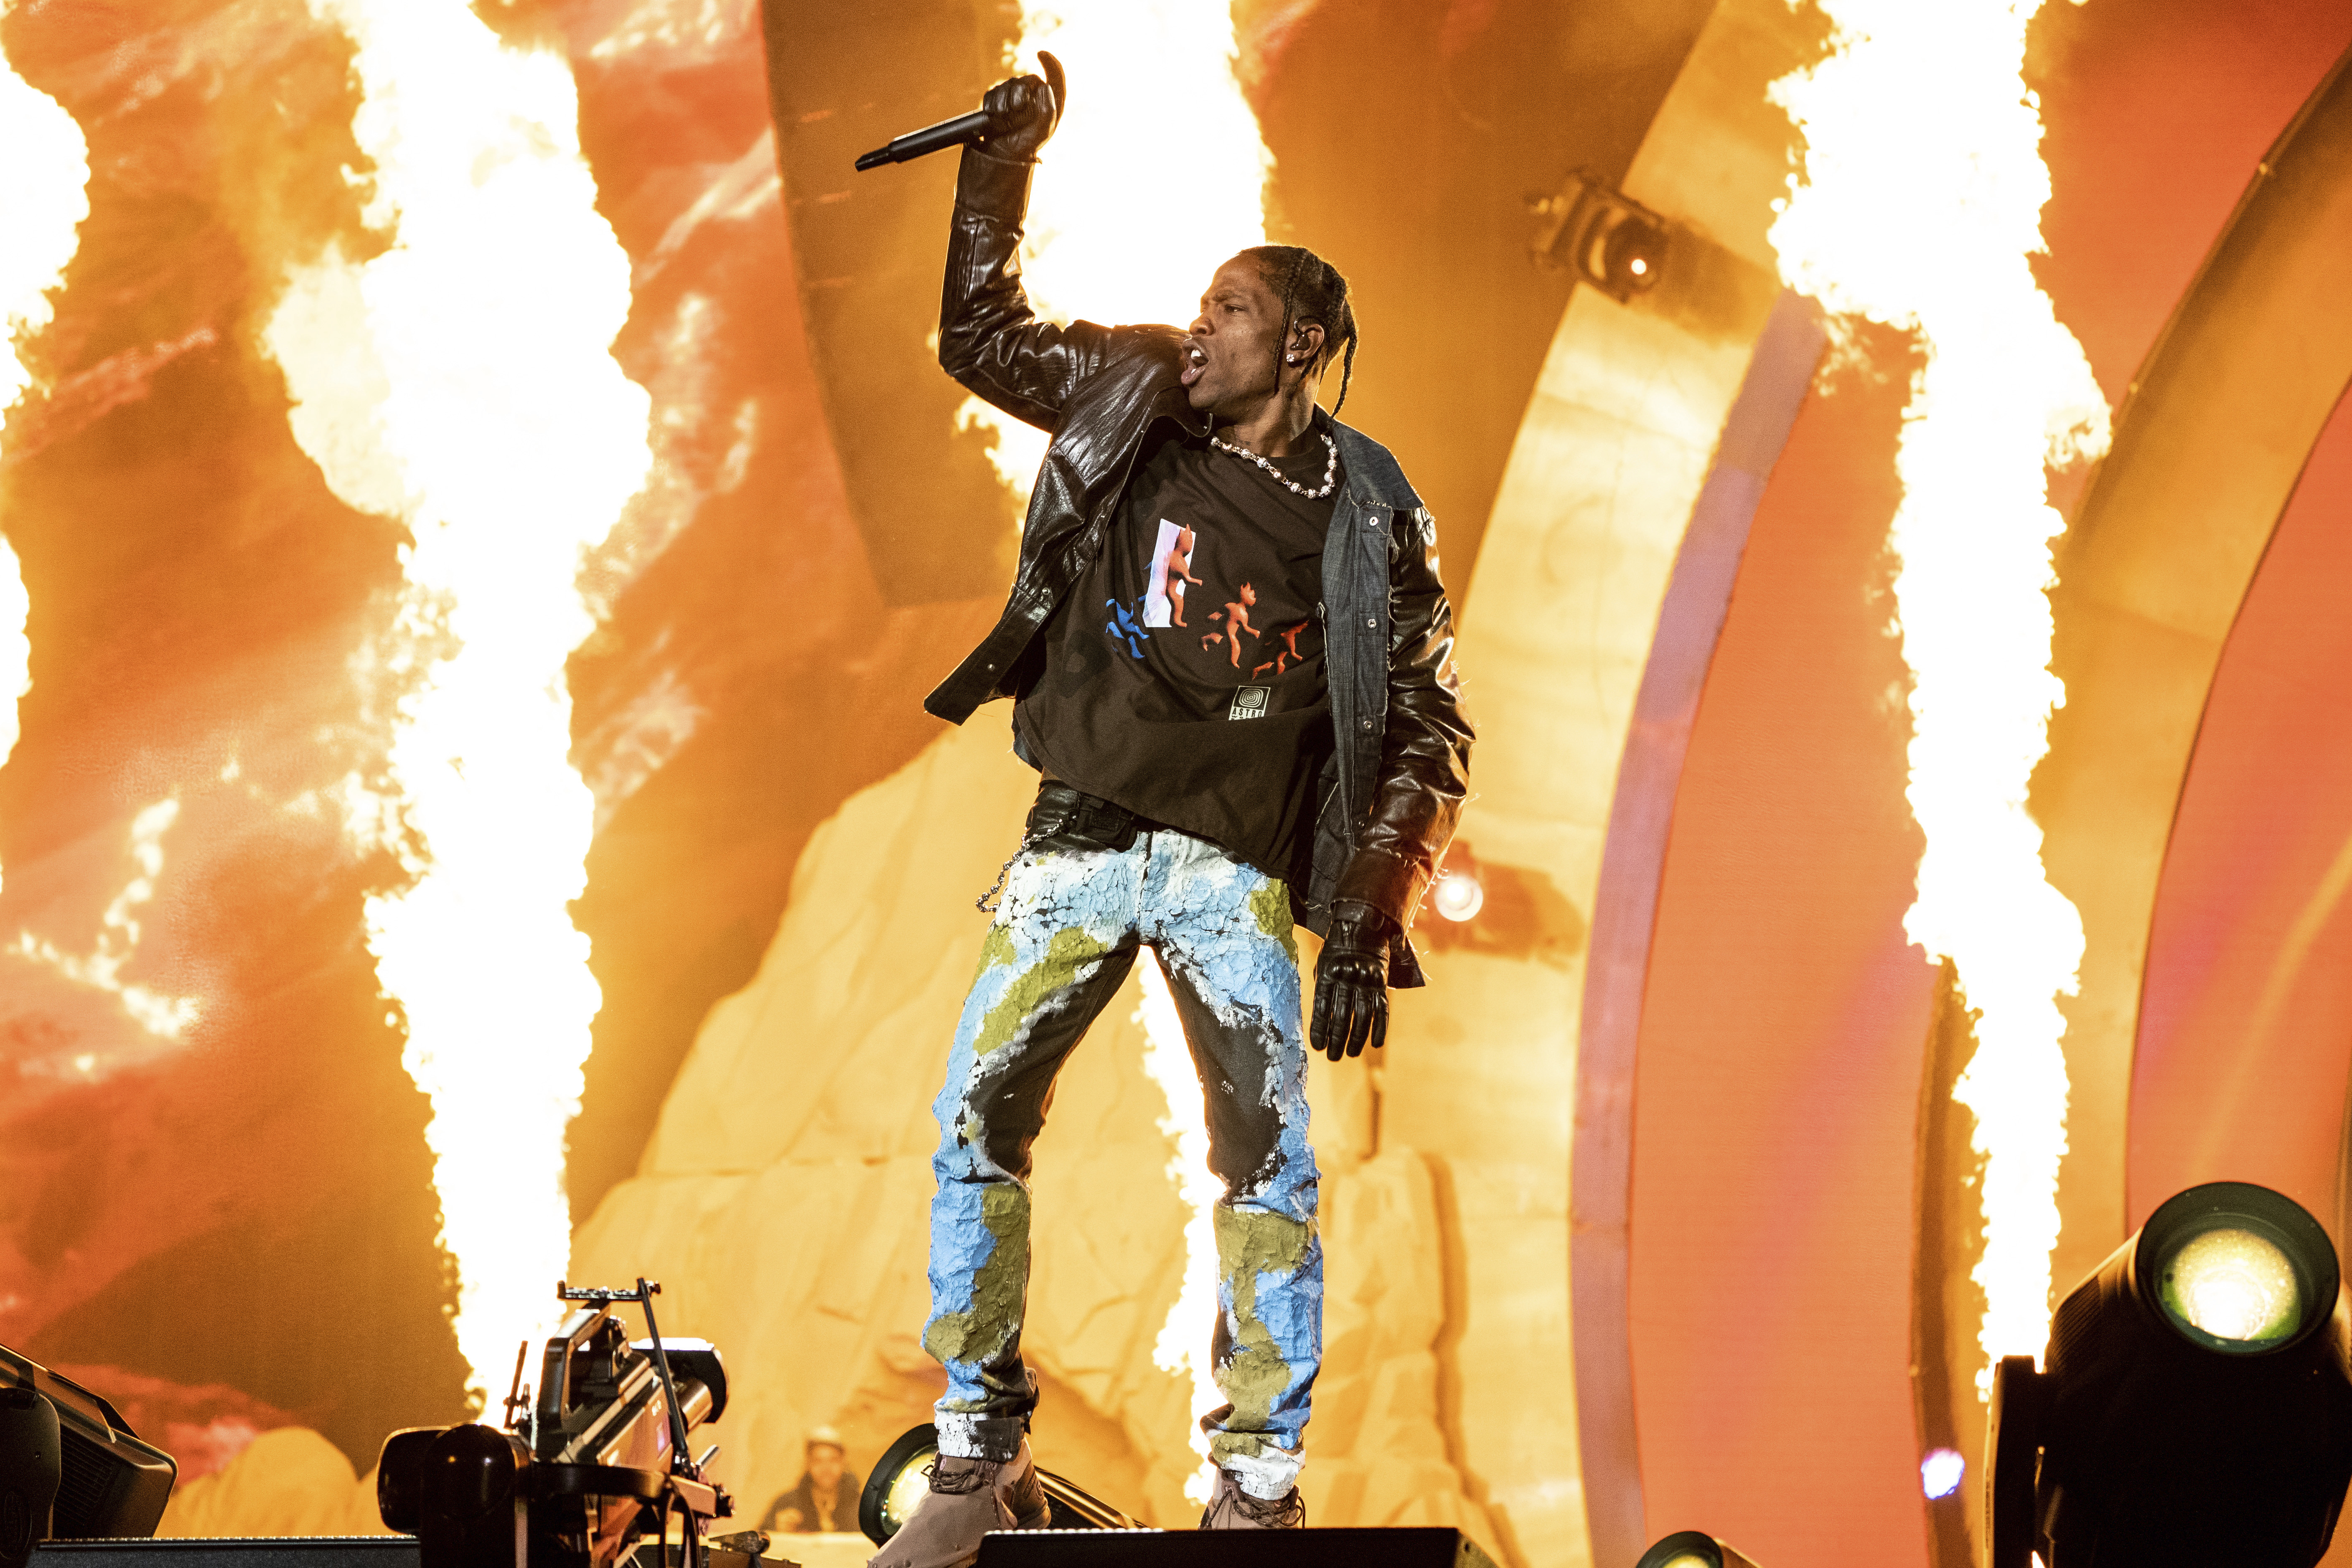 Travis Scott performs at day one of the Astroworld Music Festival at NRG Park